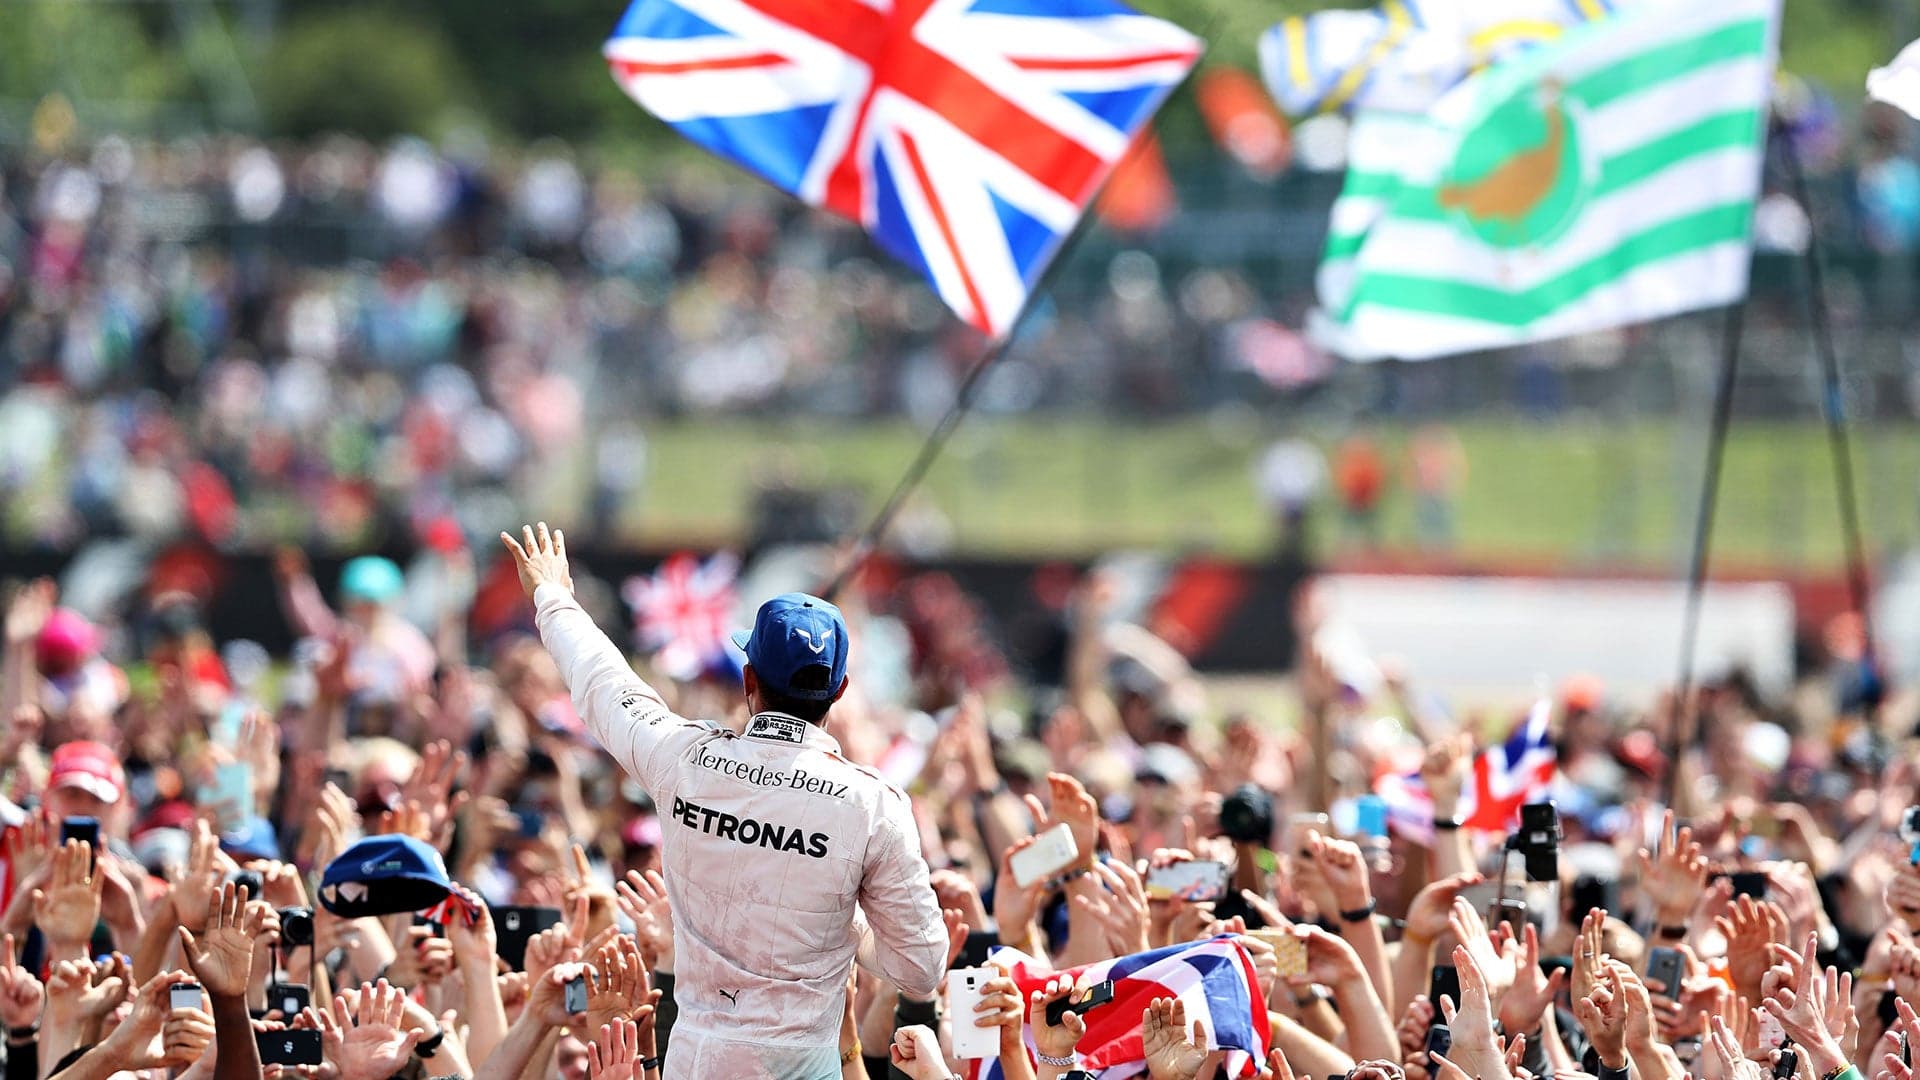 Lewis Hamilton Will Be the Greatest F1 Driver of All Time